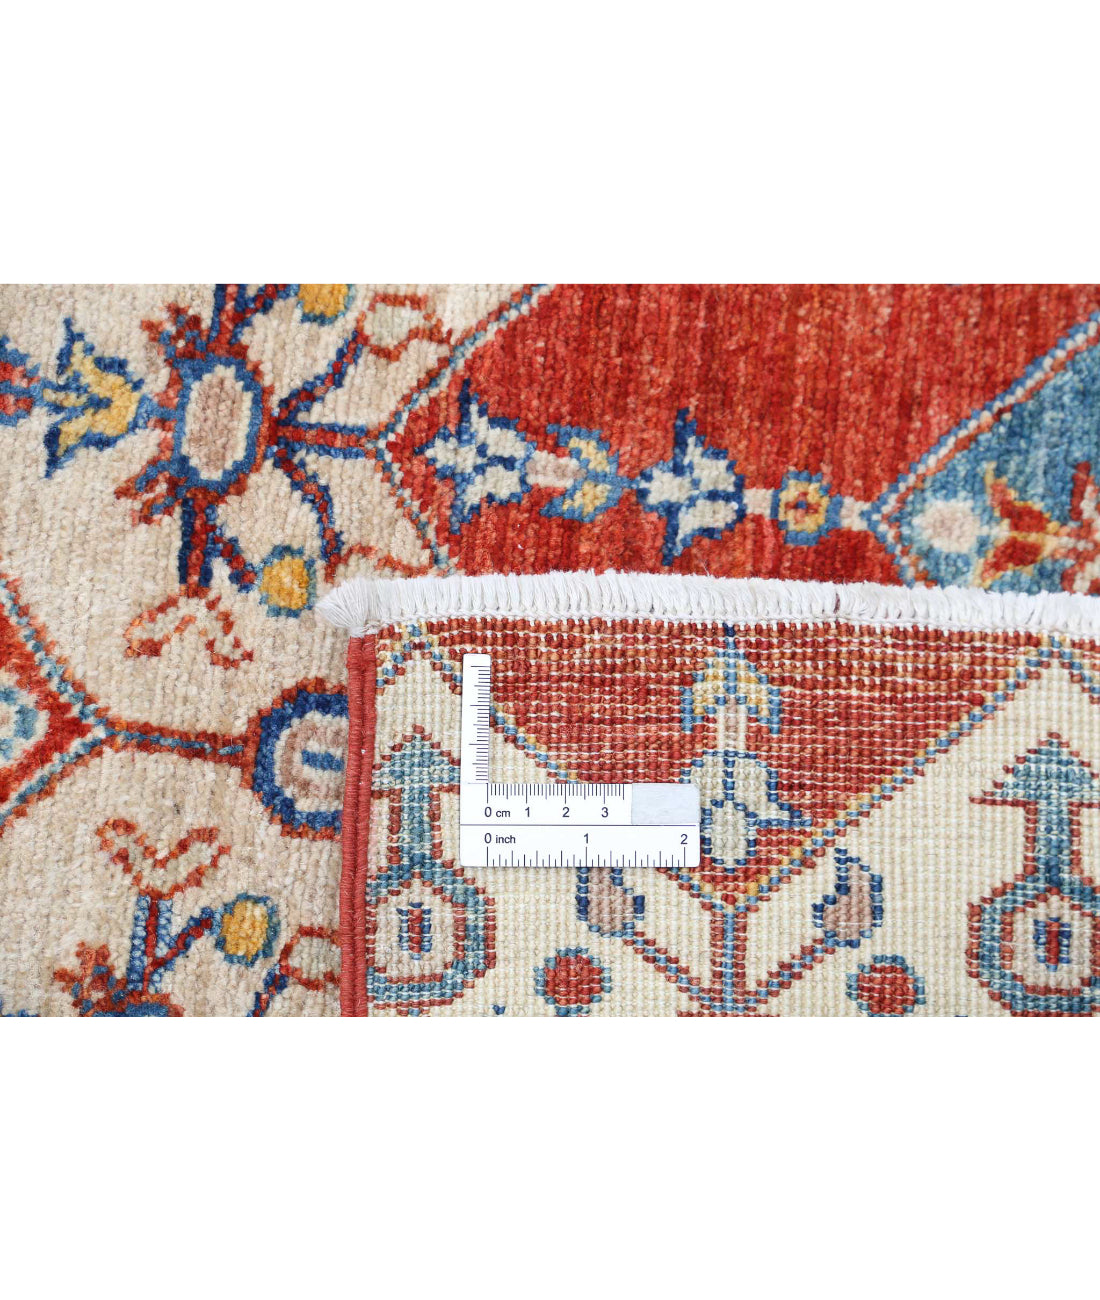 Hand Knotted Artemix Wool Rug - 5'6'' x 7'10'' 5'6'' x 7'10'' (165 X 235) / Red / Multi